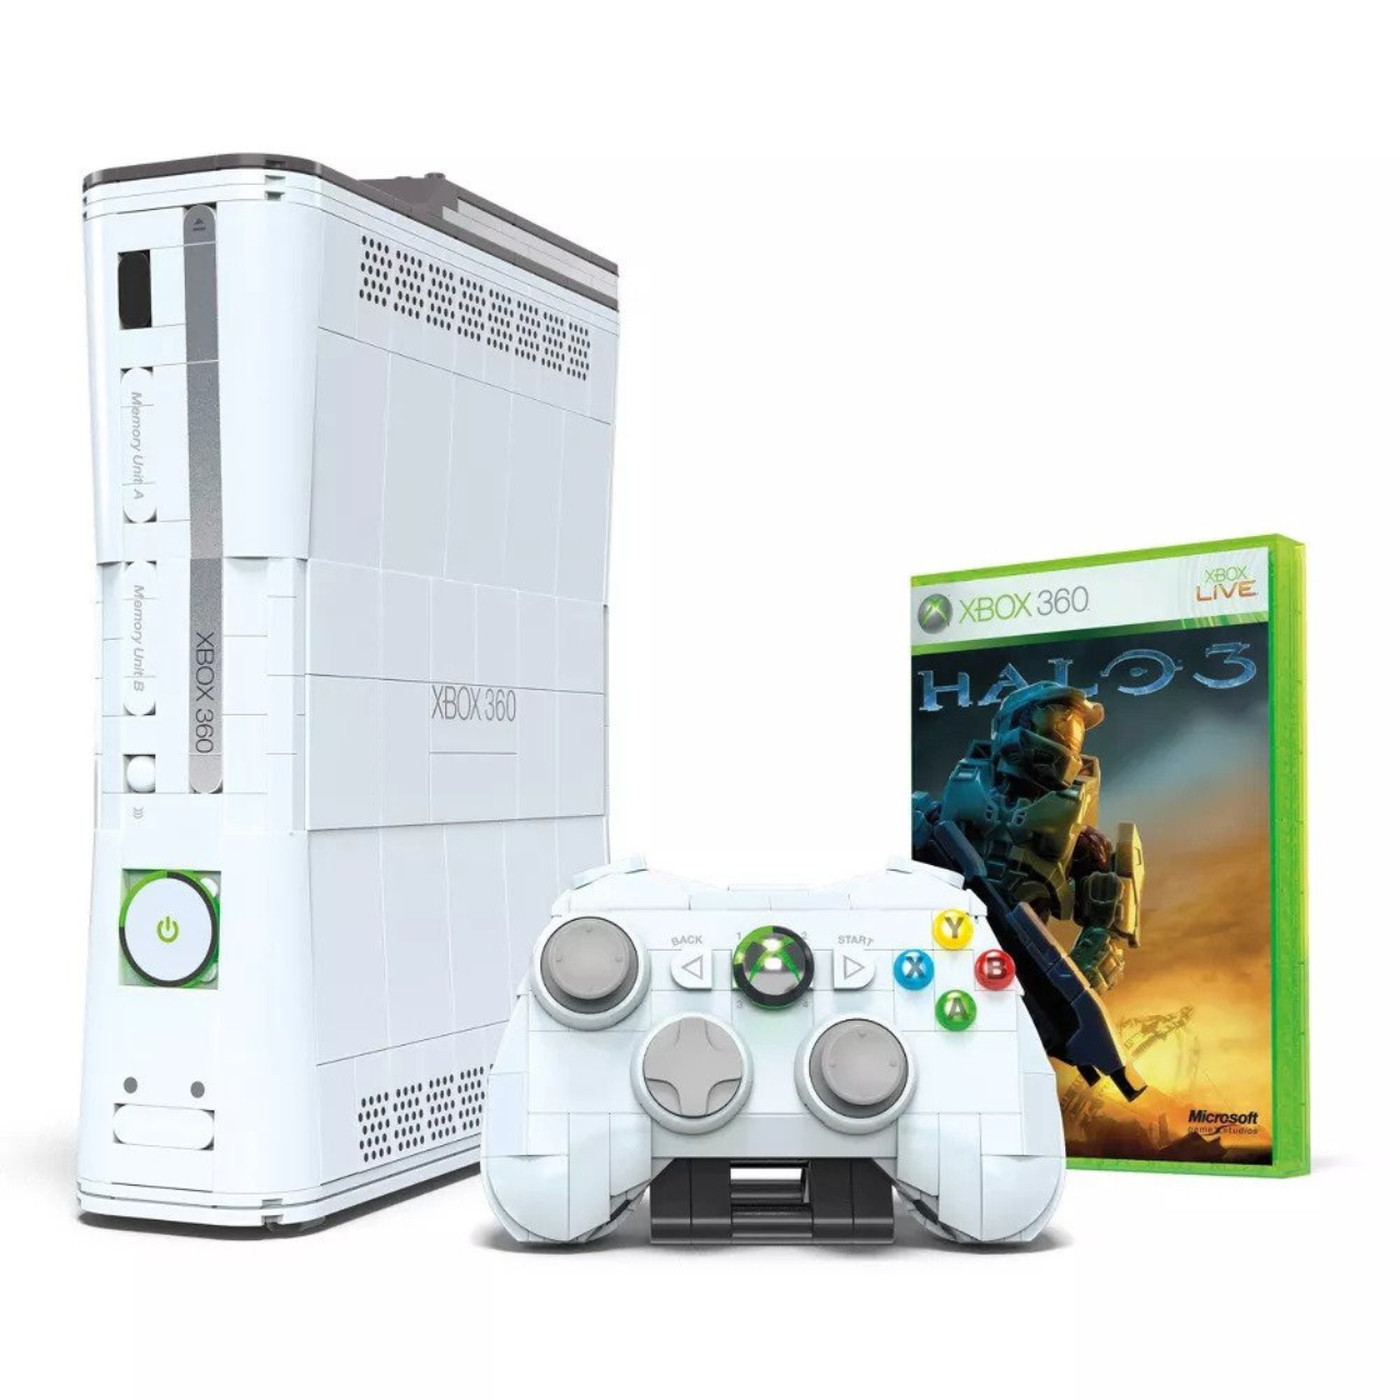 henvise Den aktuelle Økonomi You'll soon be able to buy a brand-new Xbox 360 - The Verge